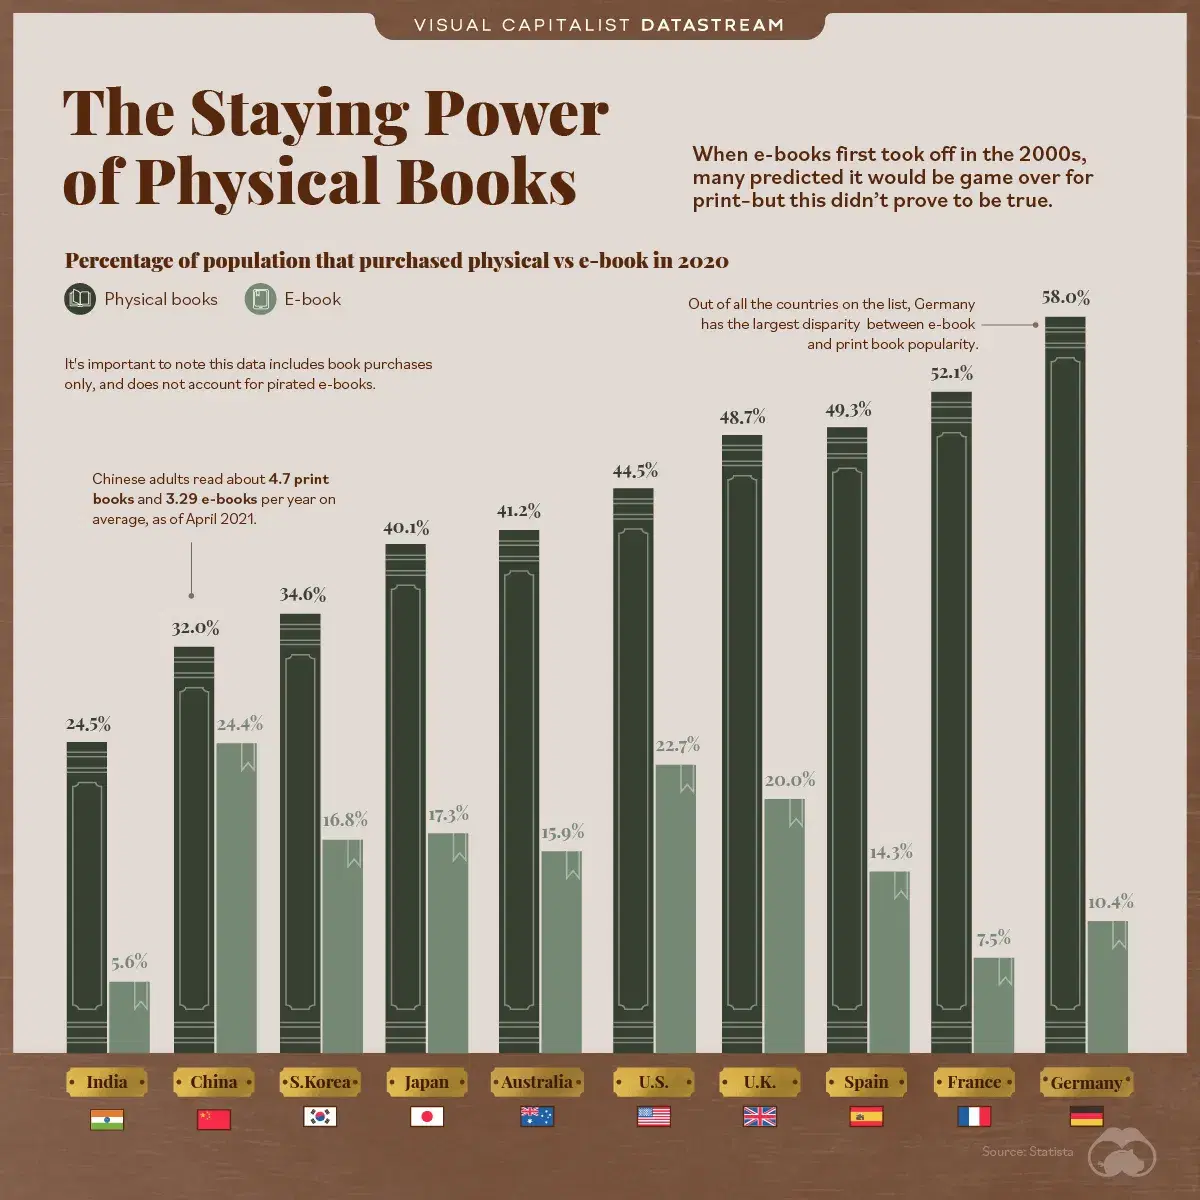 Print Has Prevailed: The Staying Power of Physical Books